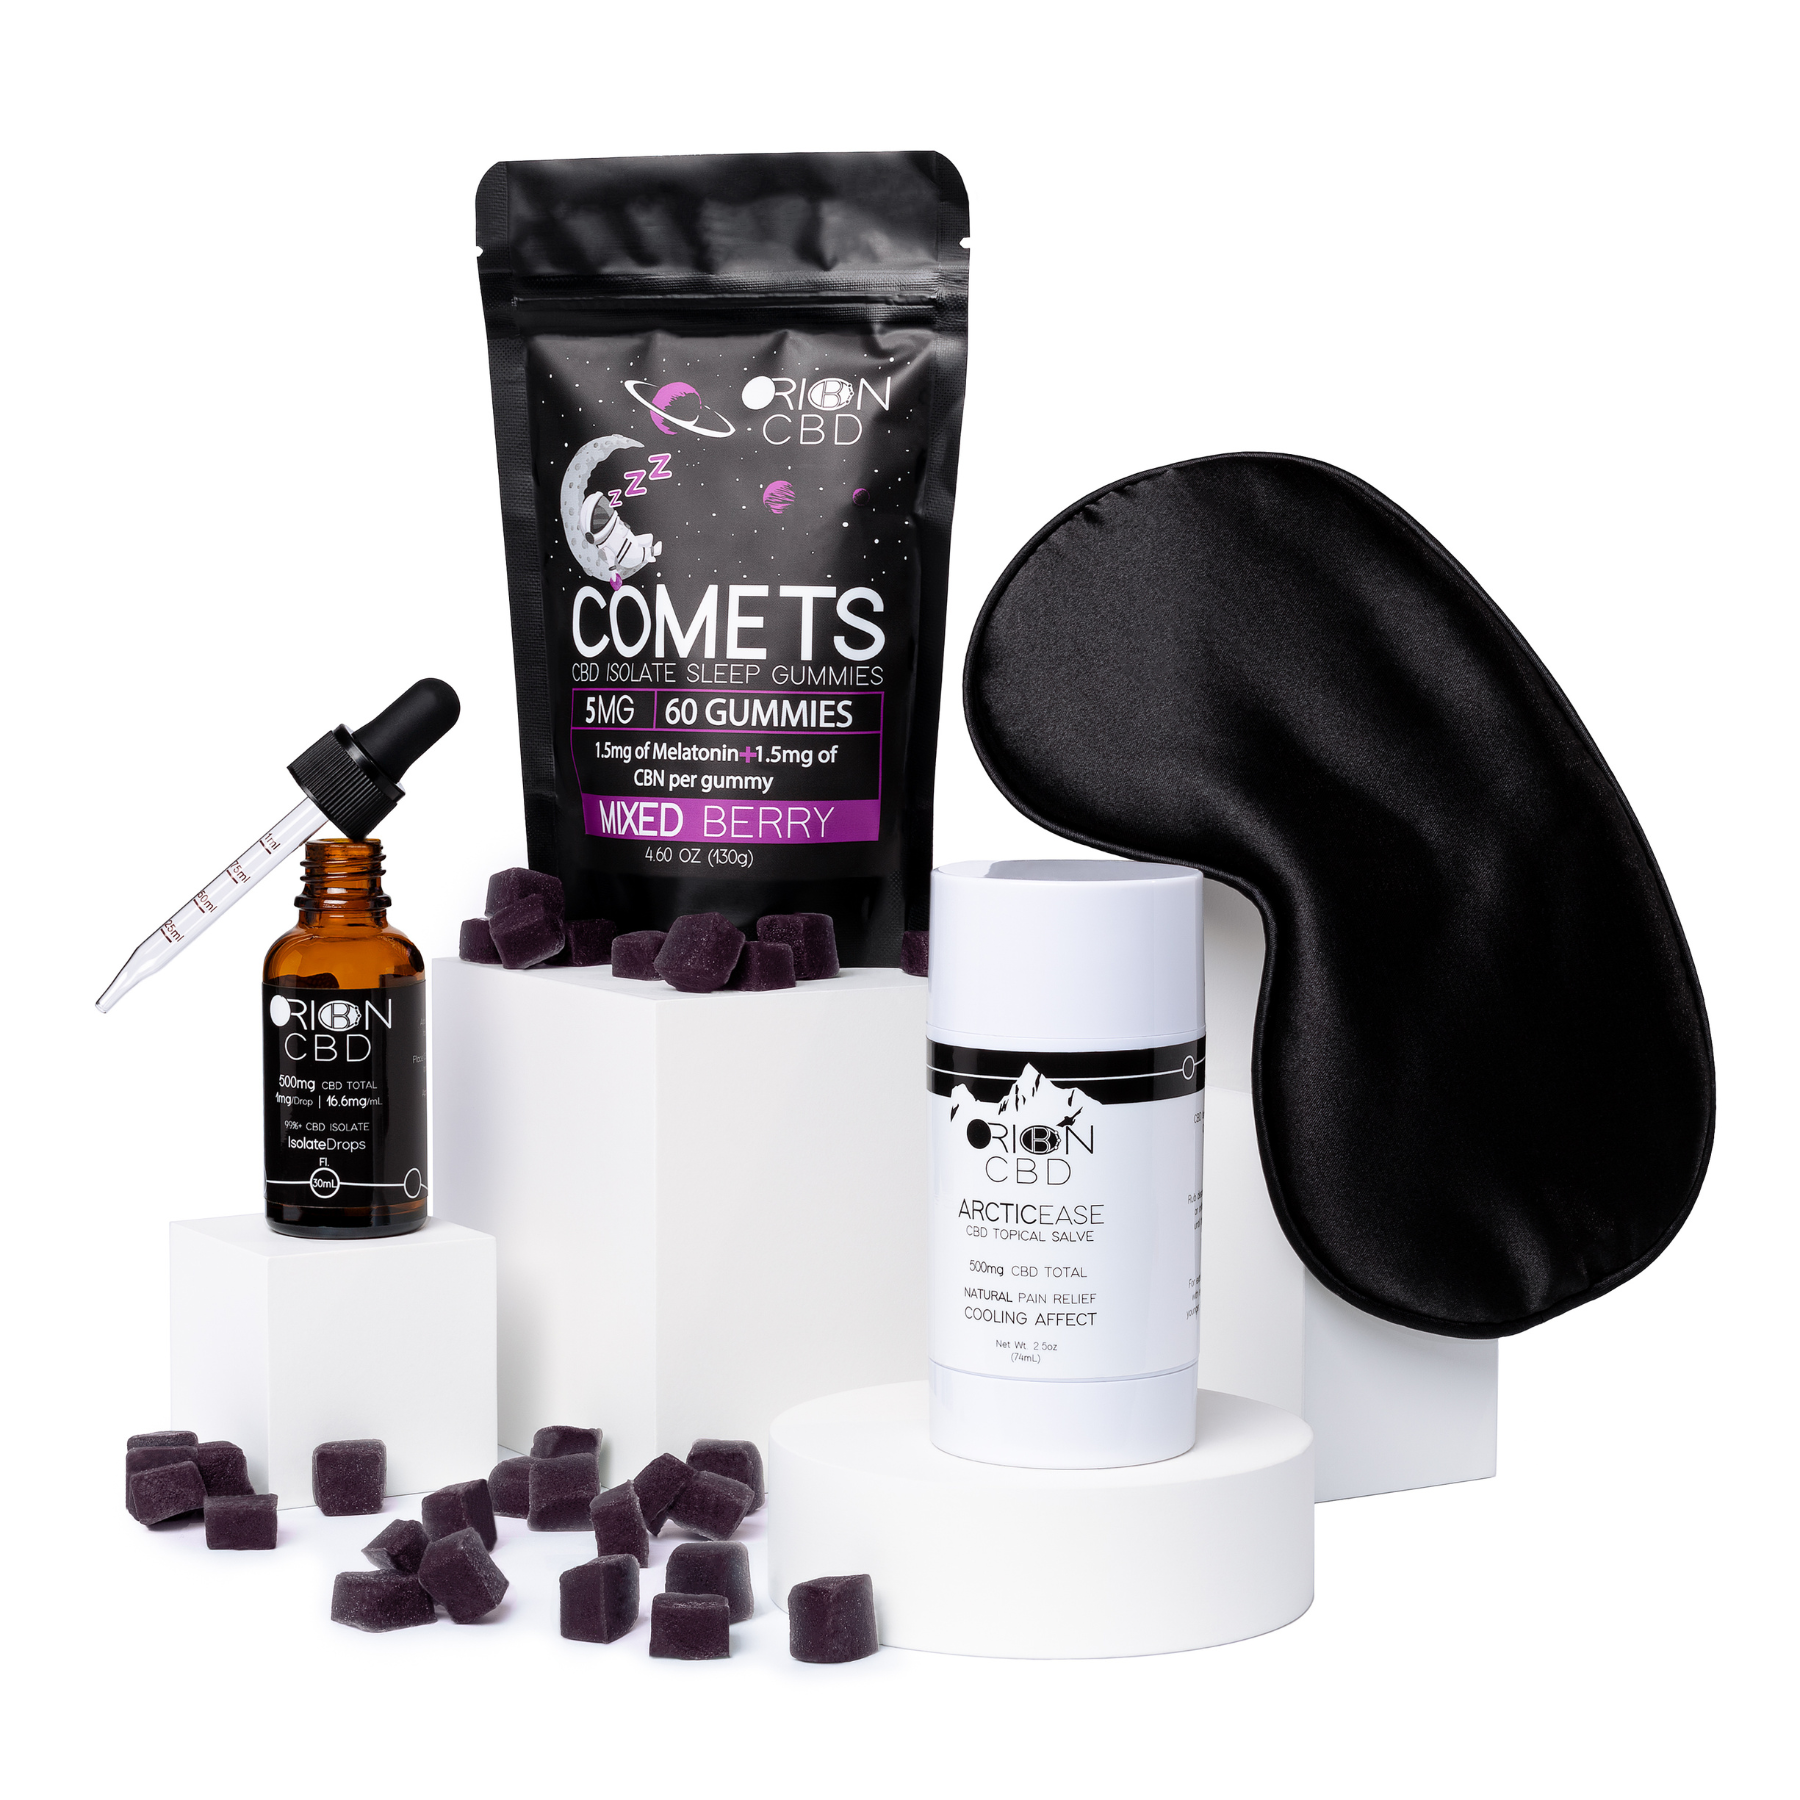 Orion CBD Deep Sleep Bundle featuring Isolate Drops, Sleep Gummies in mixed berry flavor, and Pain Relief Salve Stick on white blocks with scattered sleep gummies and a sleep mask hanging off one block